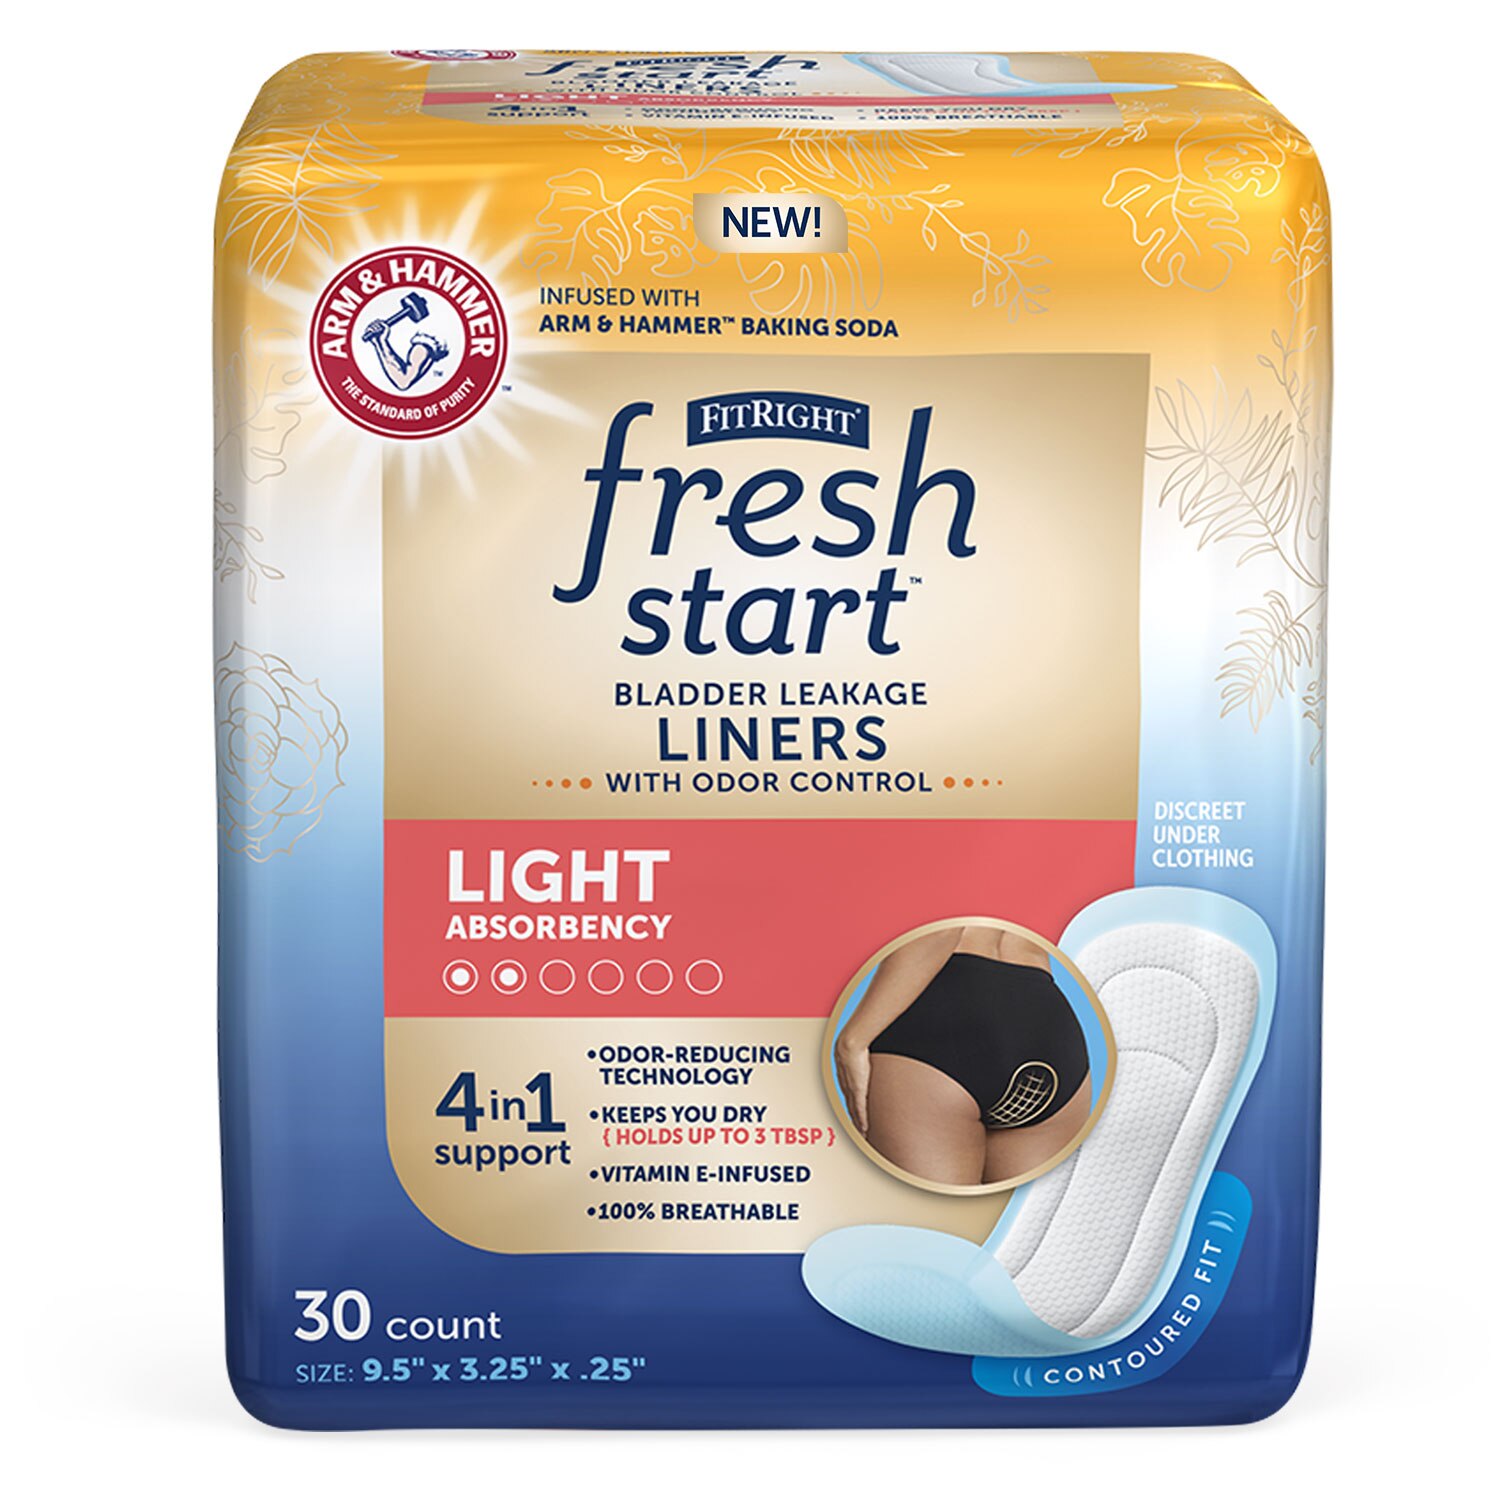 FitRight Fresh Start Urinary Incontinence Liners, Pack of 4